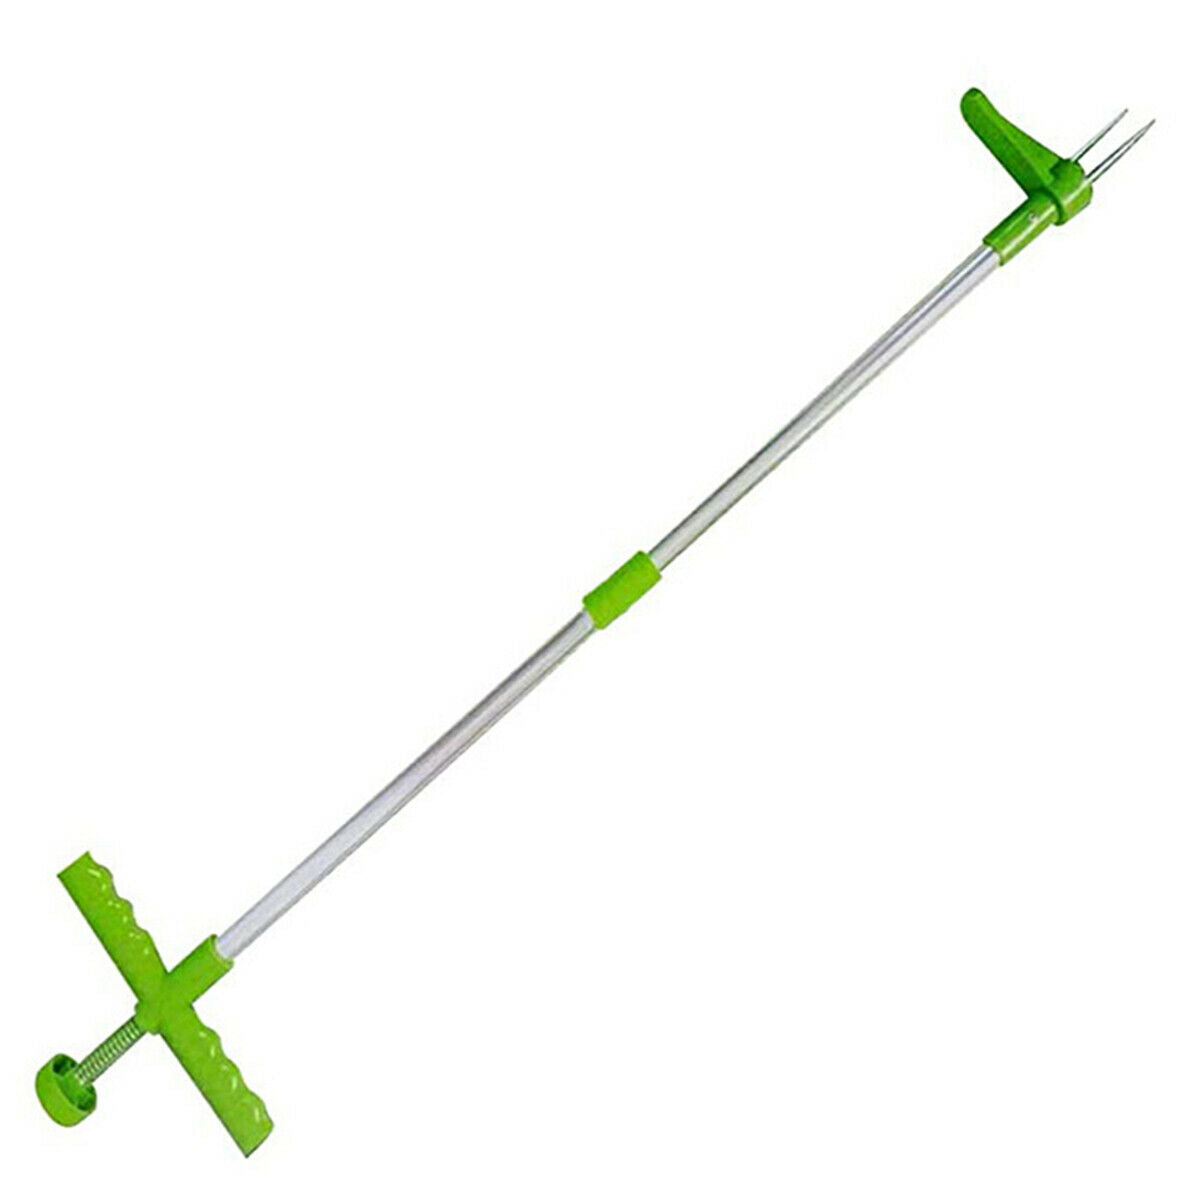 Stand-Up Weeder Twister Twist Garden Grass Lawn Remover Root Removal Tool Puller